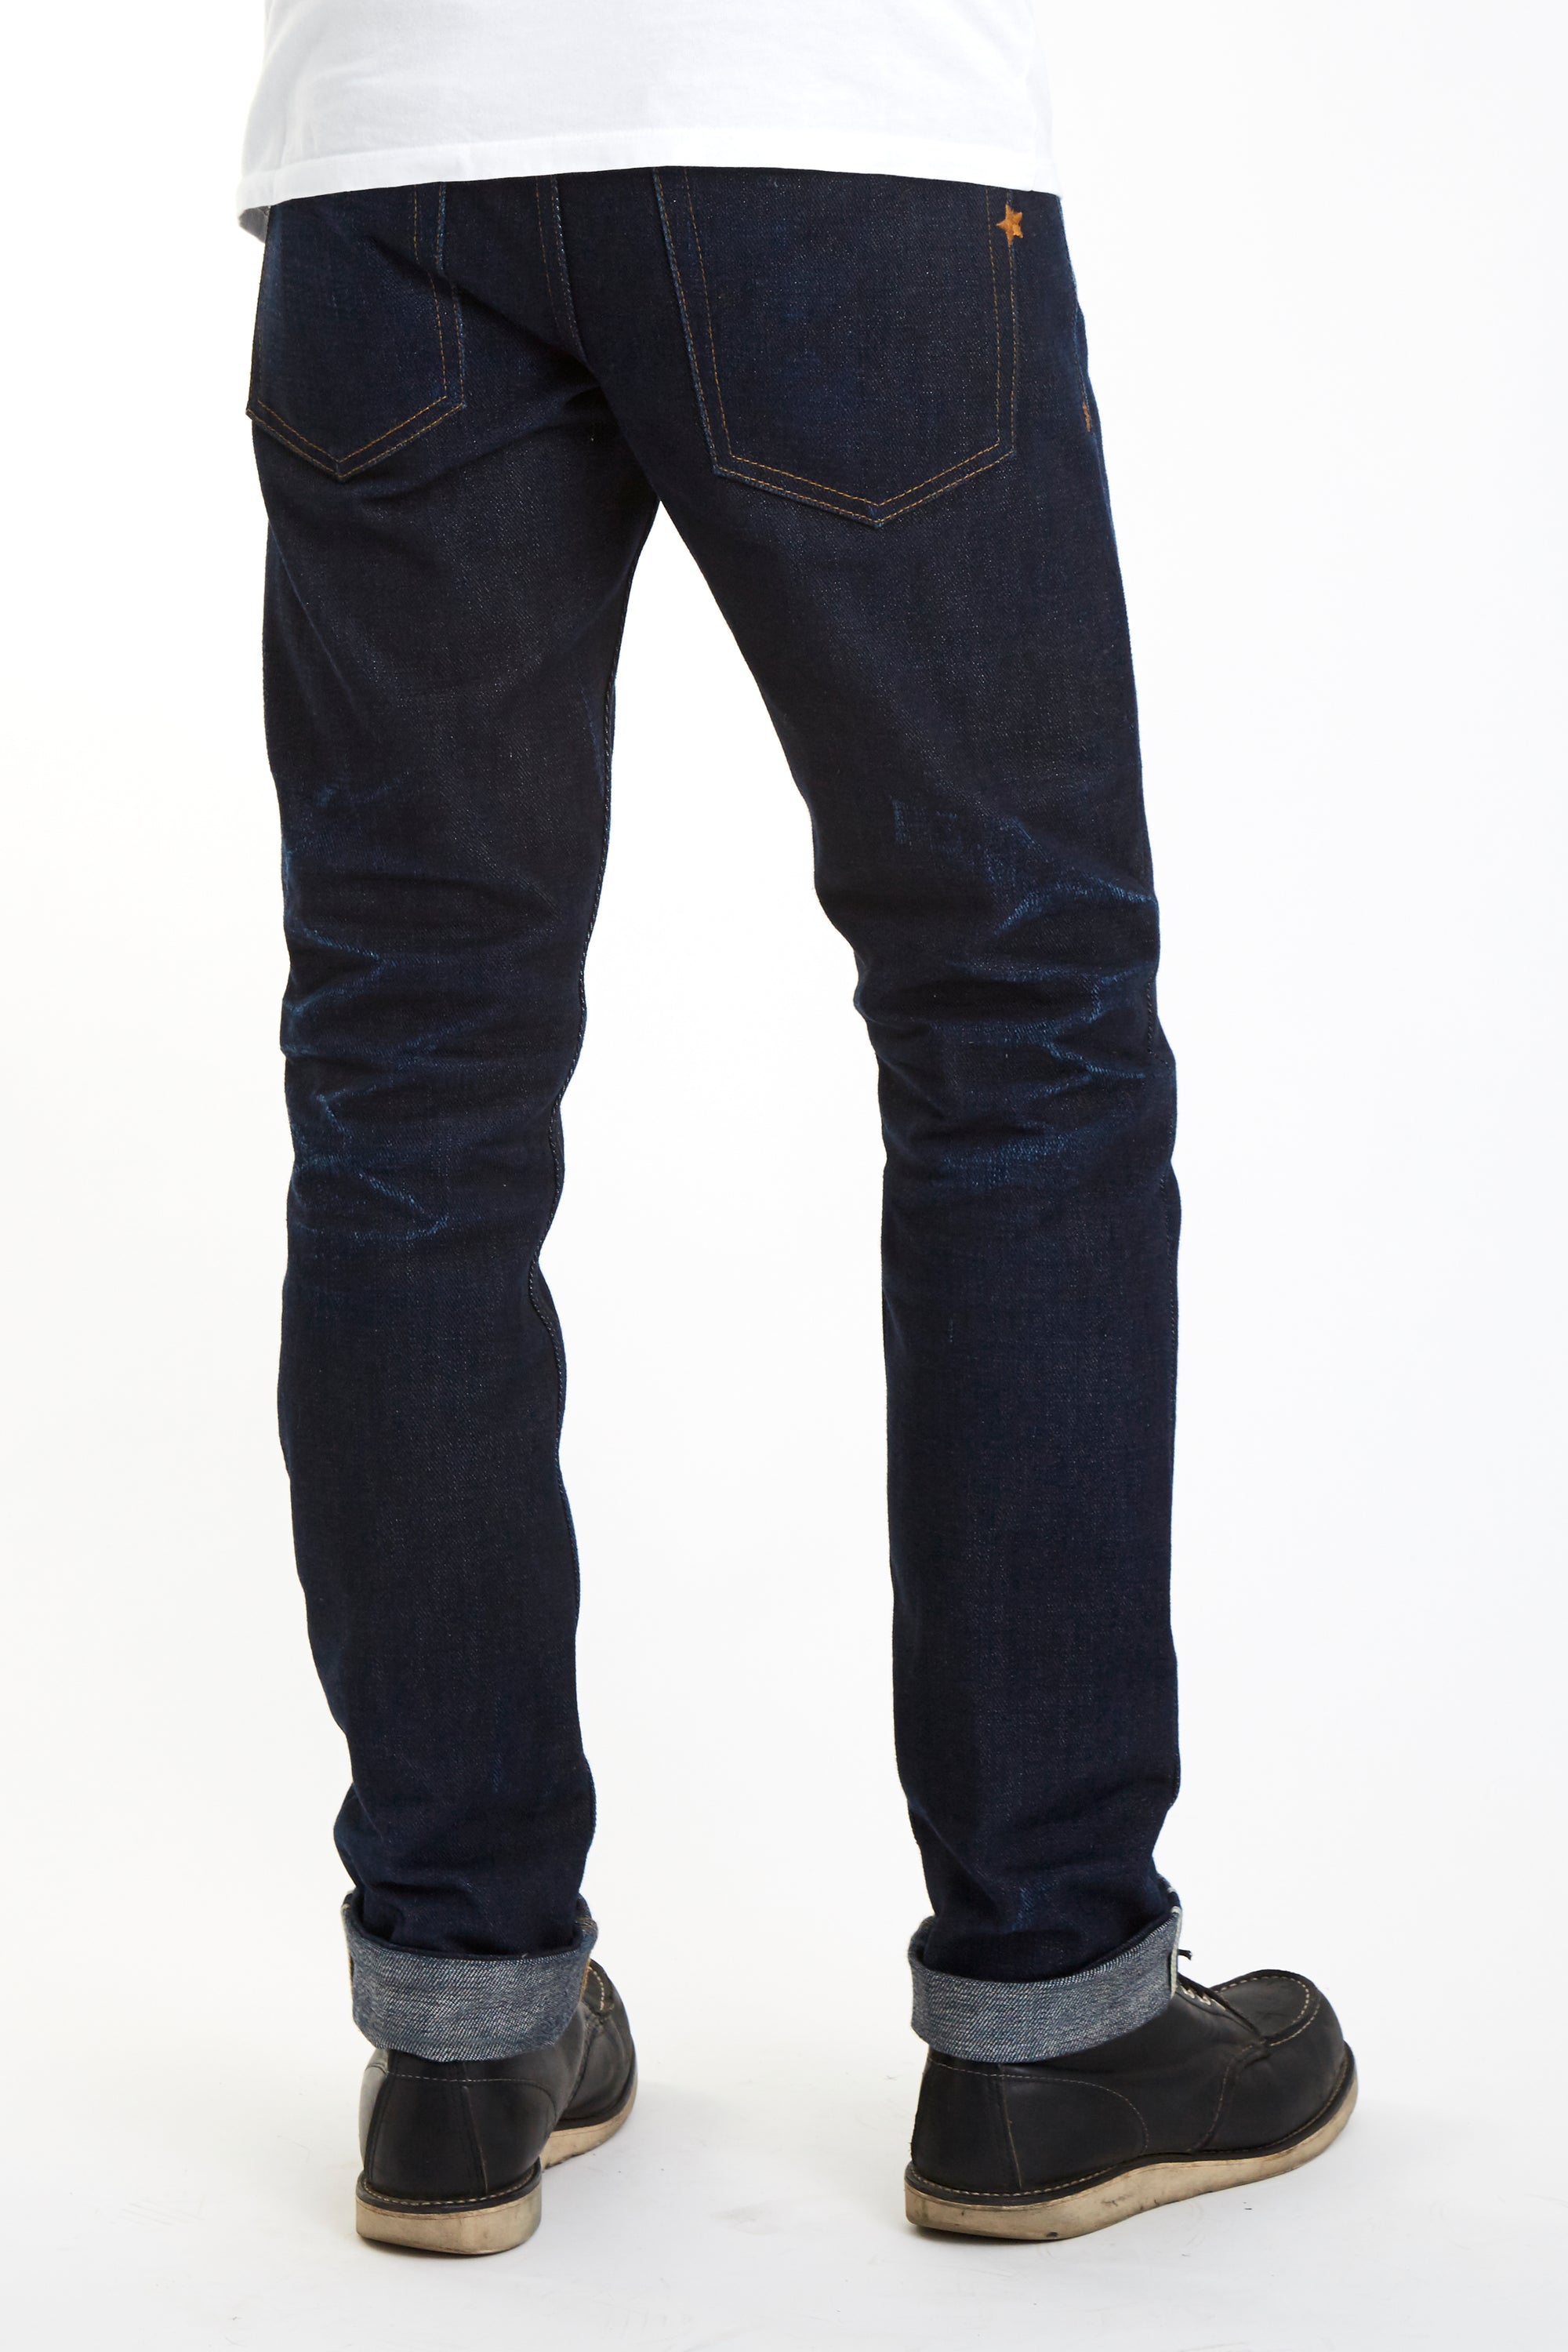 Brave Star Selvage - Denim and dogs, two companions you can always